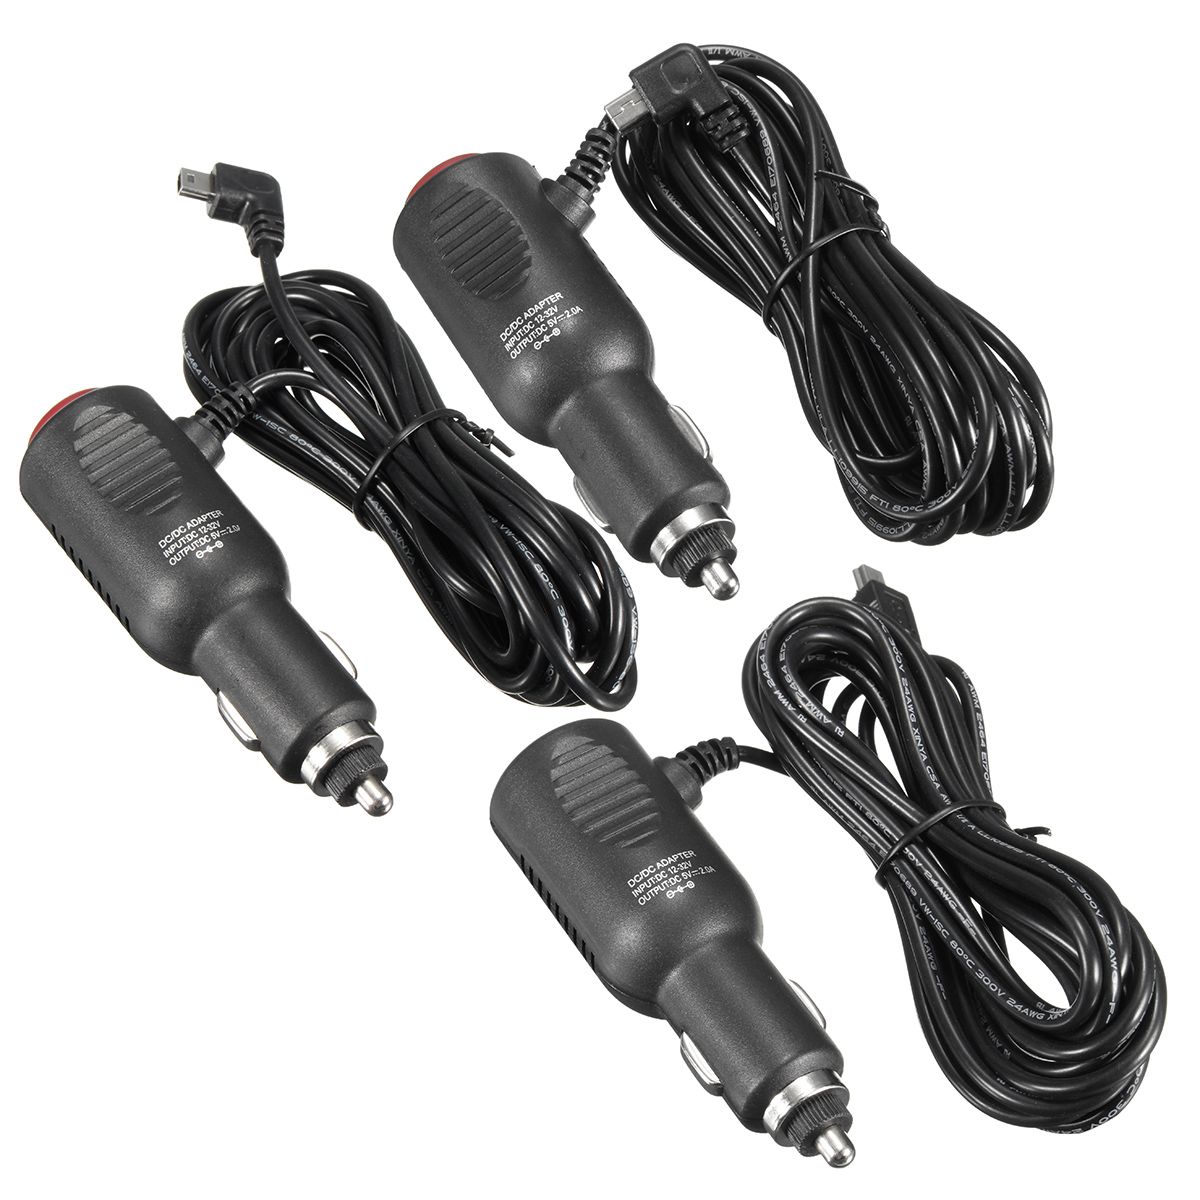 5V-2A-Mini-USB-Vehicle-Car-Charger-Cable-Switch-For-Garmin-Nuvi-GPS-1341496